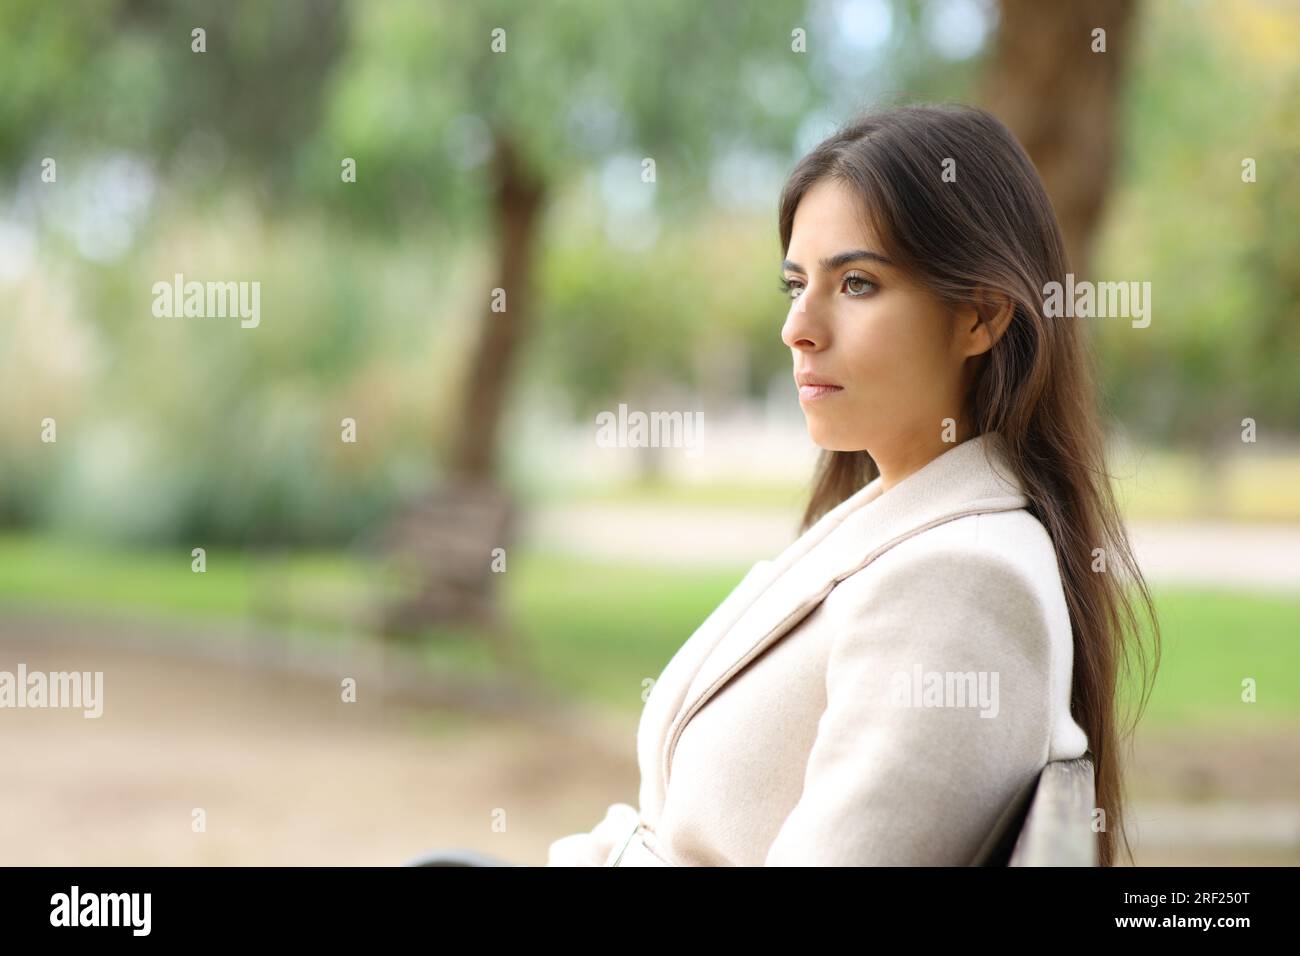 Serious woman in winter looks away on a bench in a park Stock Photo